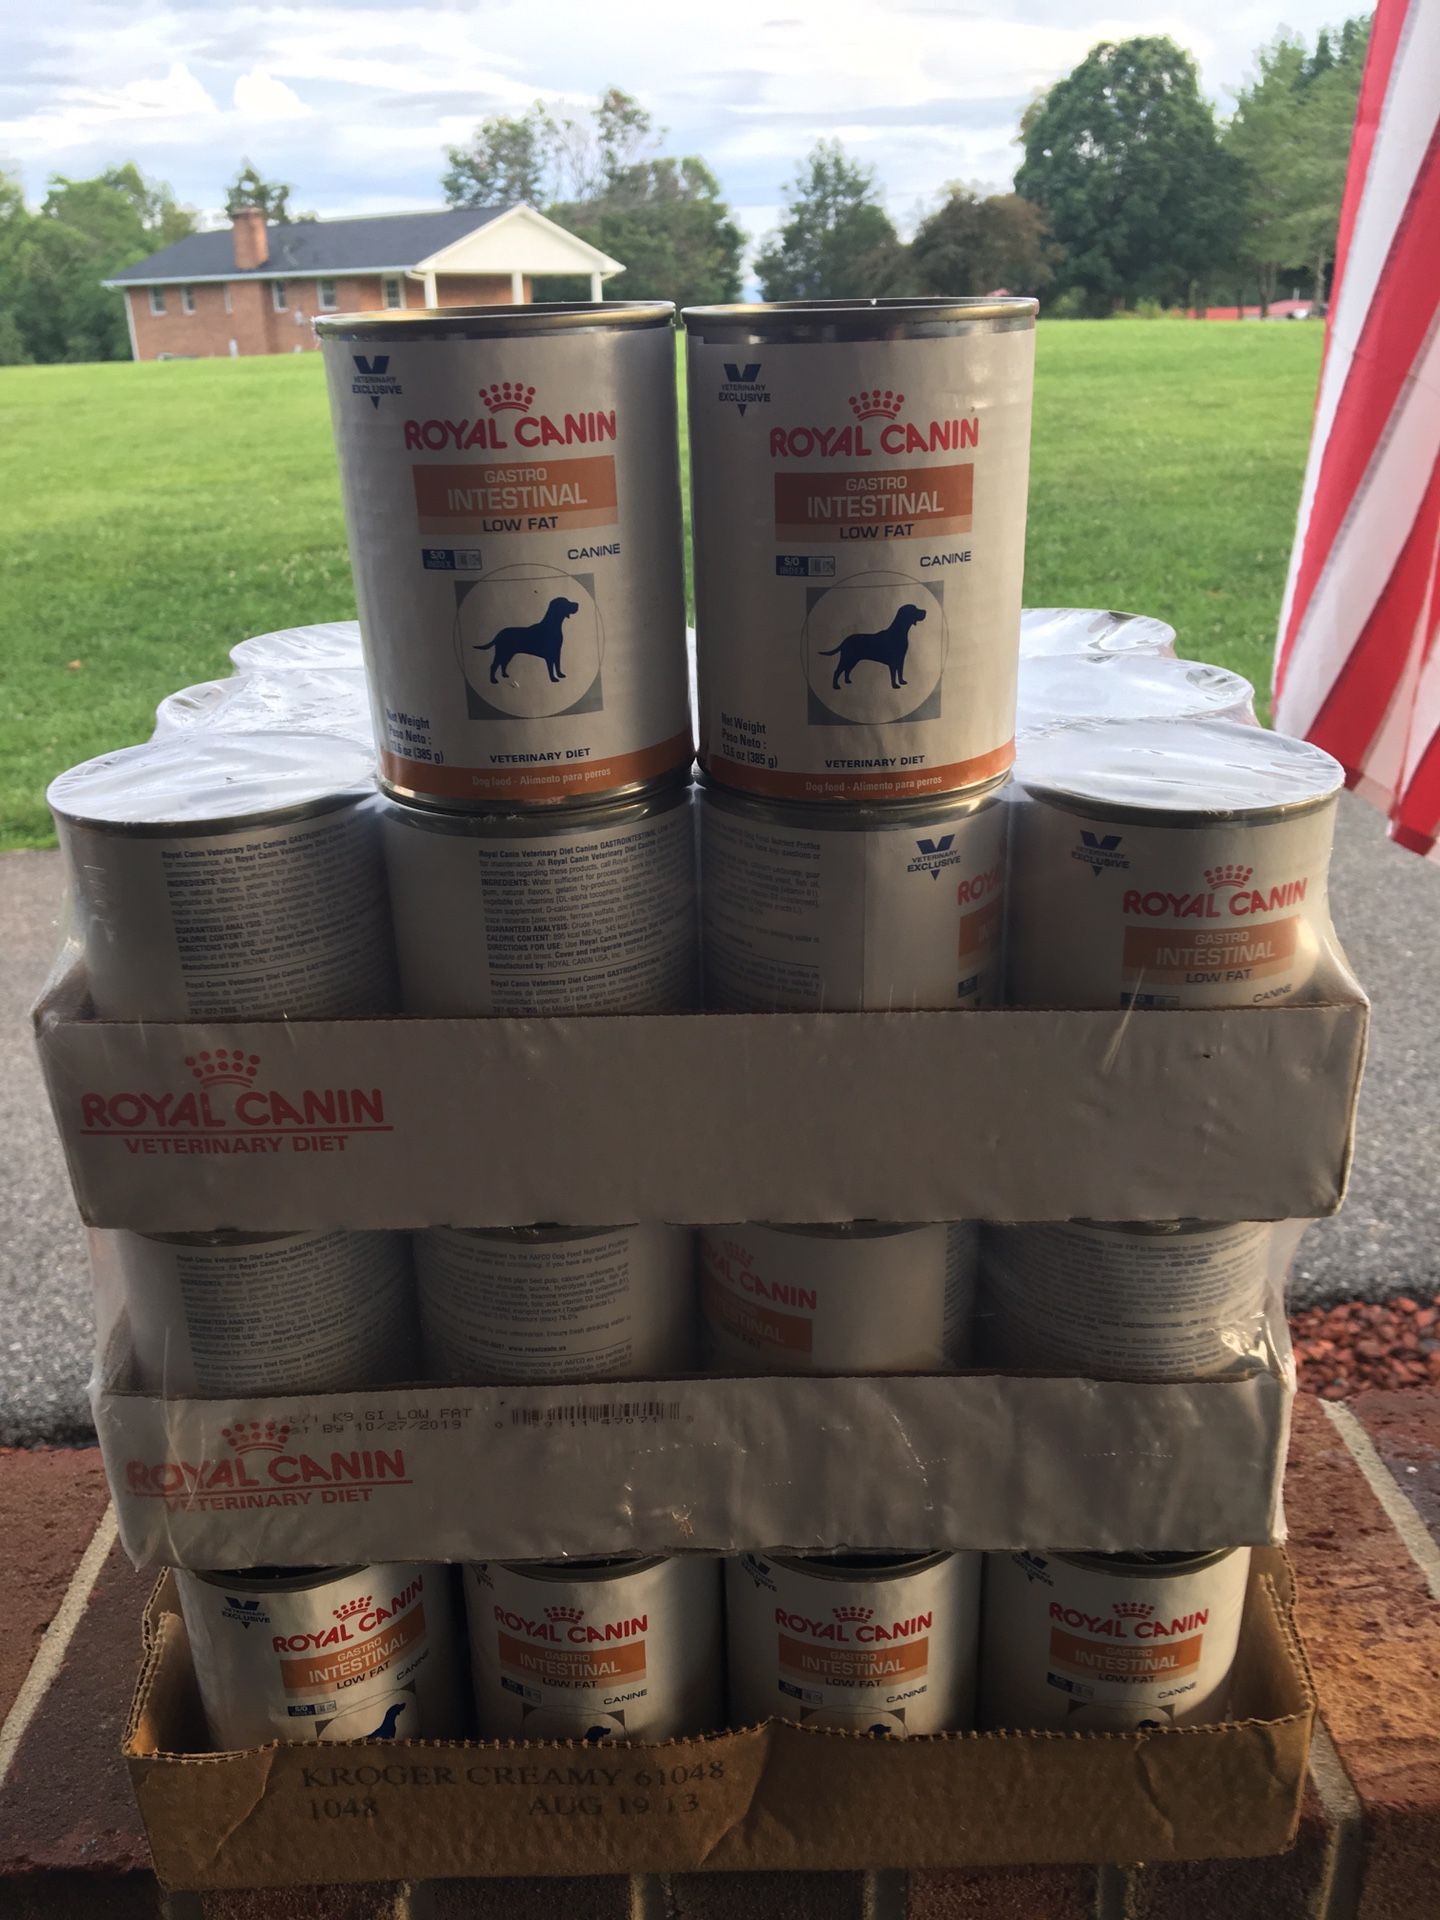 Royal canine Low fat dog food 36 cans